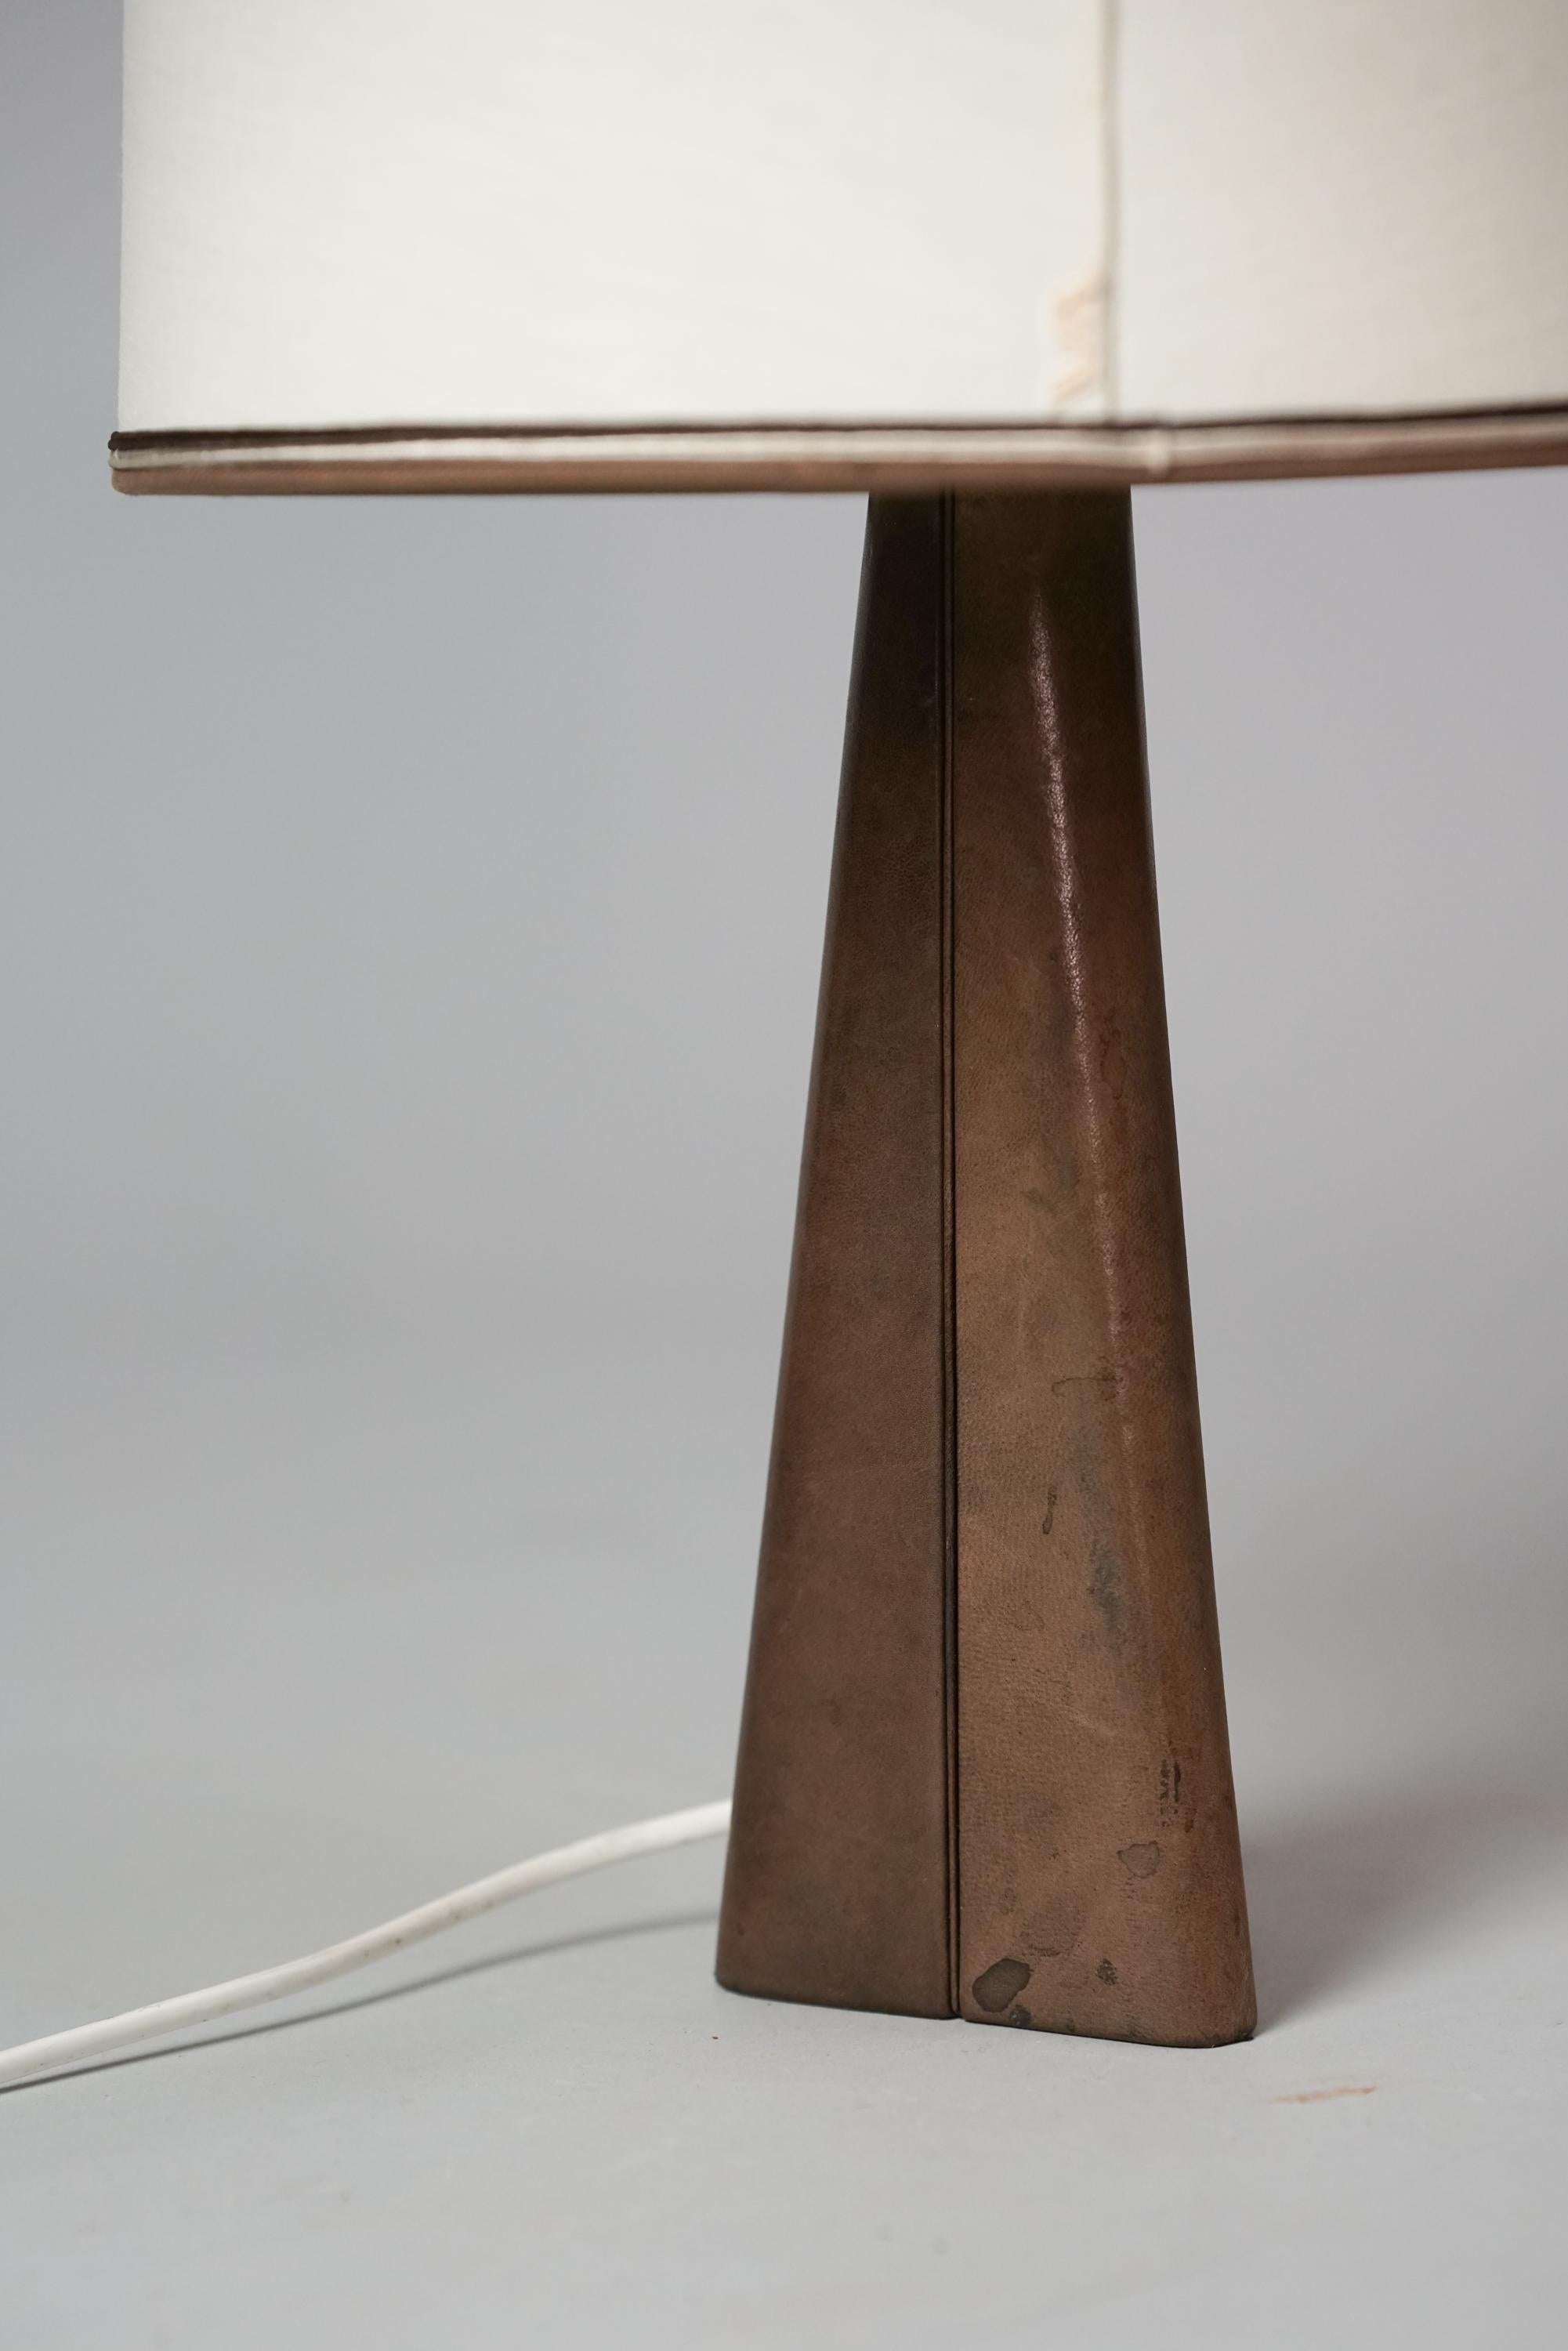 Scandinavian Modern Leather Table Lamp, Lisa Johansson-Pape, Orno Oy, 1950s For Sale